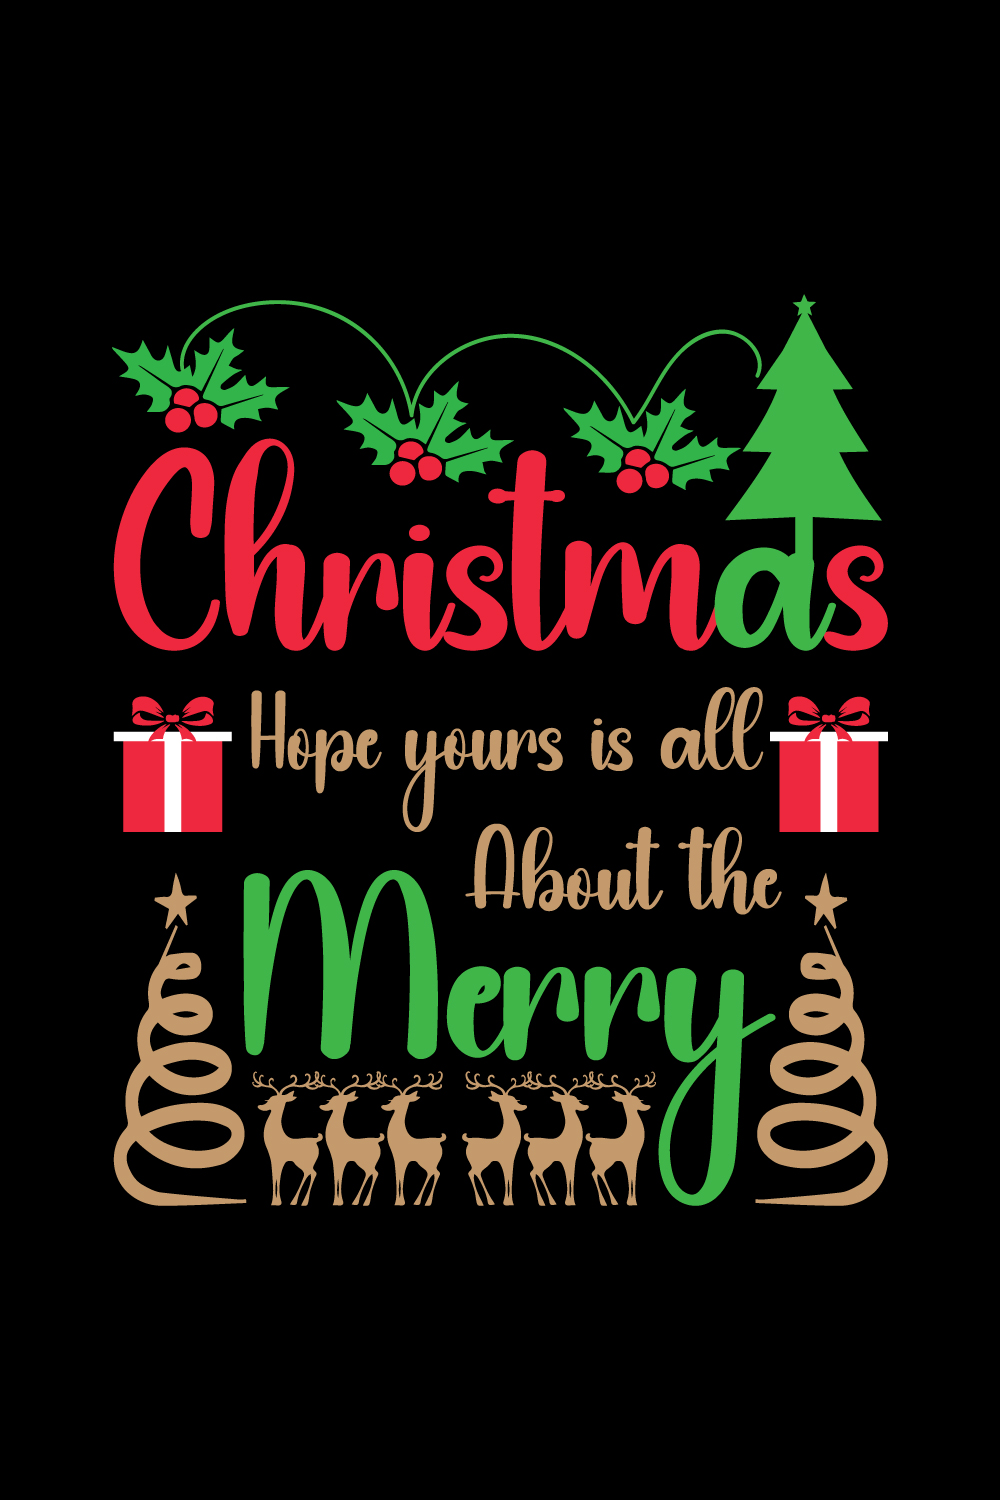 Christmas "Christmas hope yours is all about the Merry" T-Shirt Design pinterest preview image.